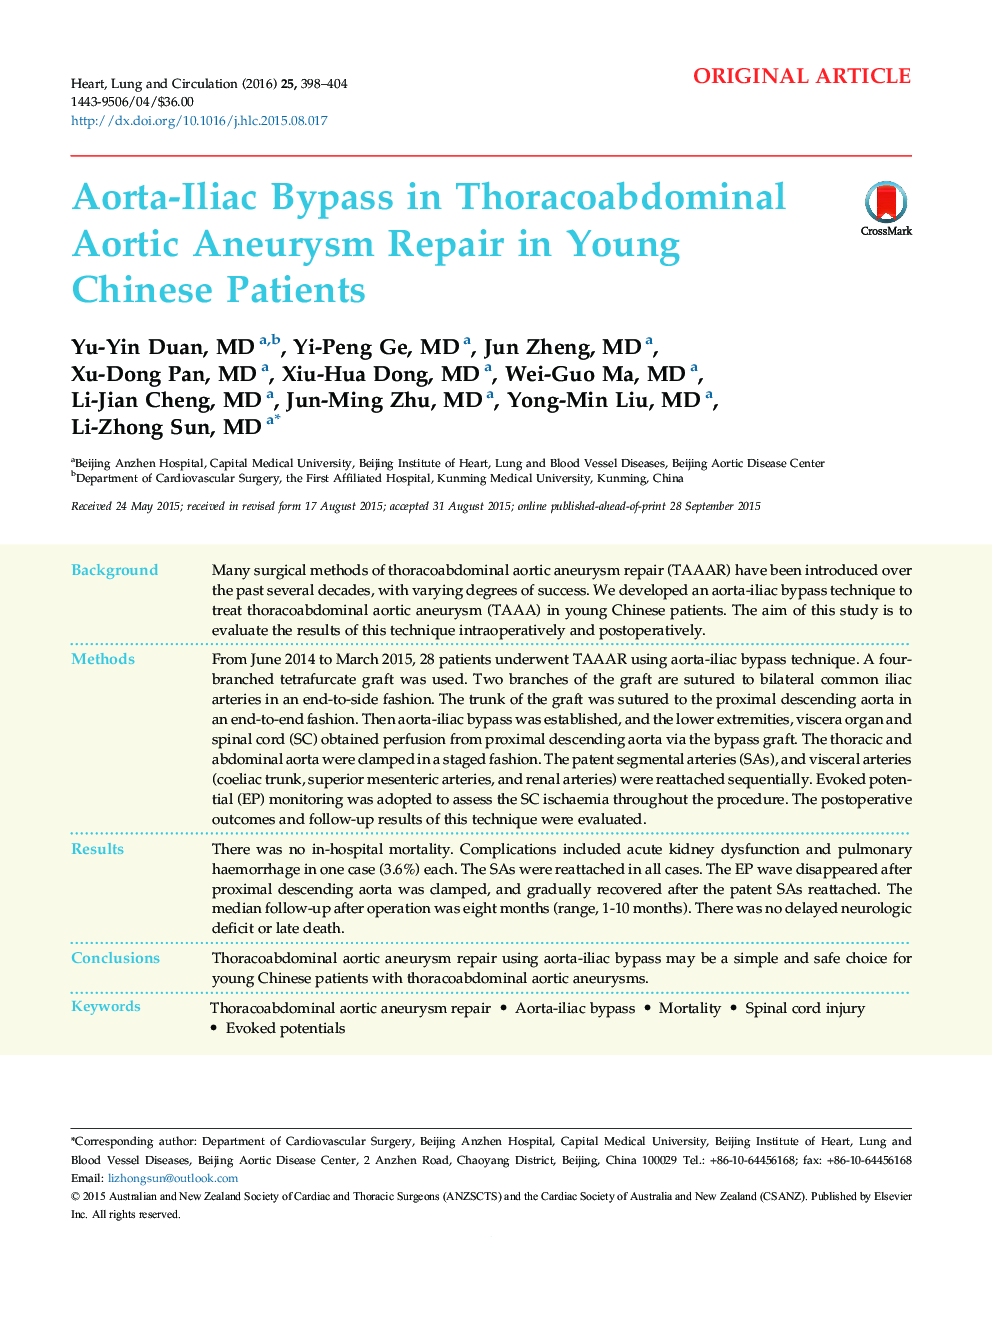 Aorta-Iliac Bypass in Thoracoabdominal Aortic Aneurysm Repair in Young Chinese Patients